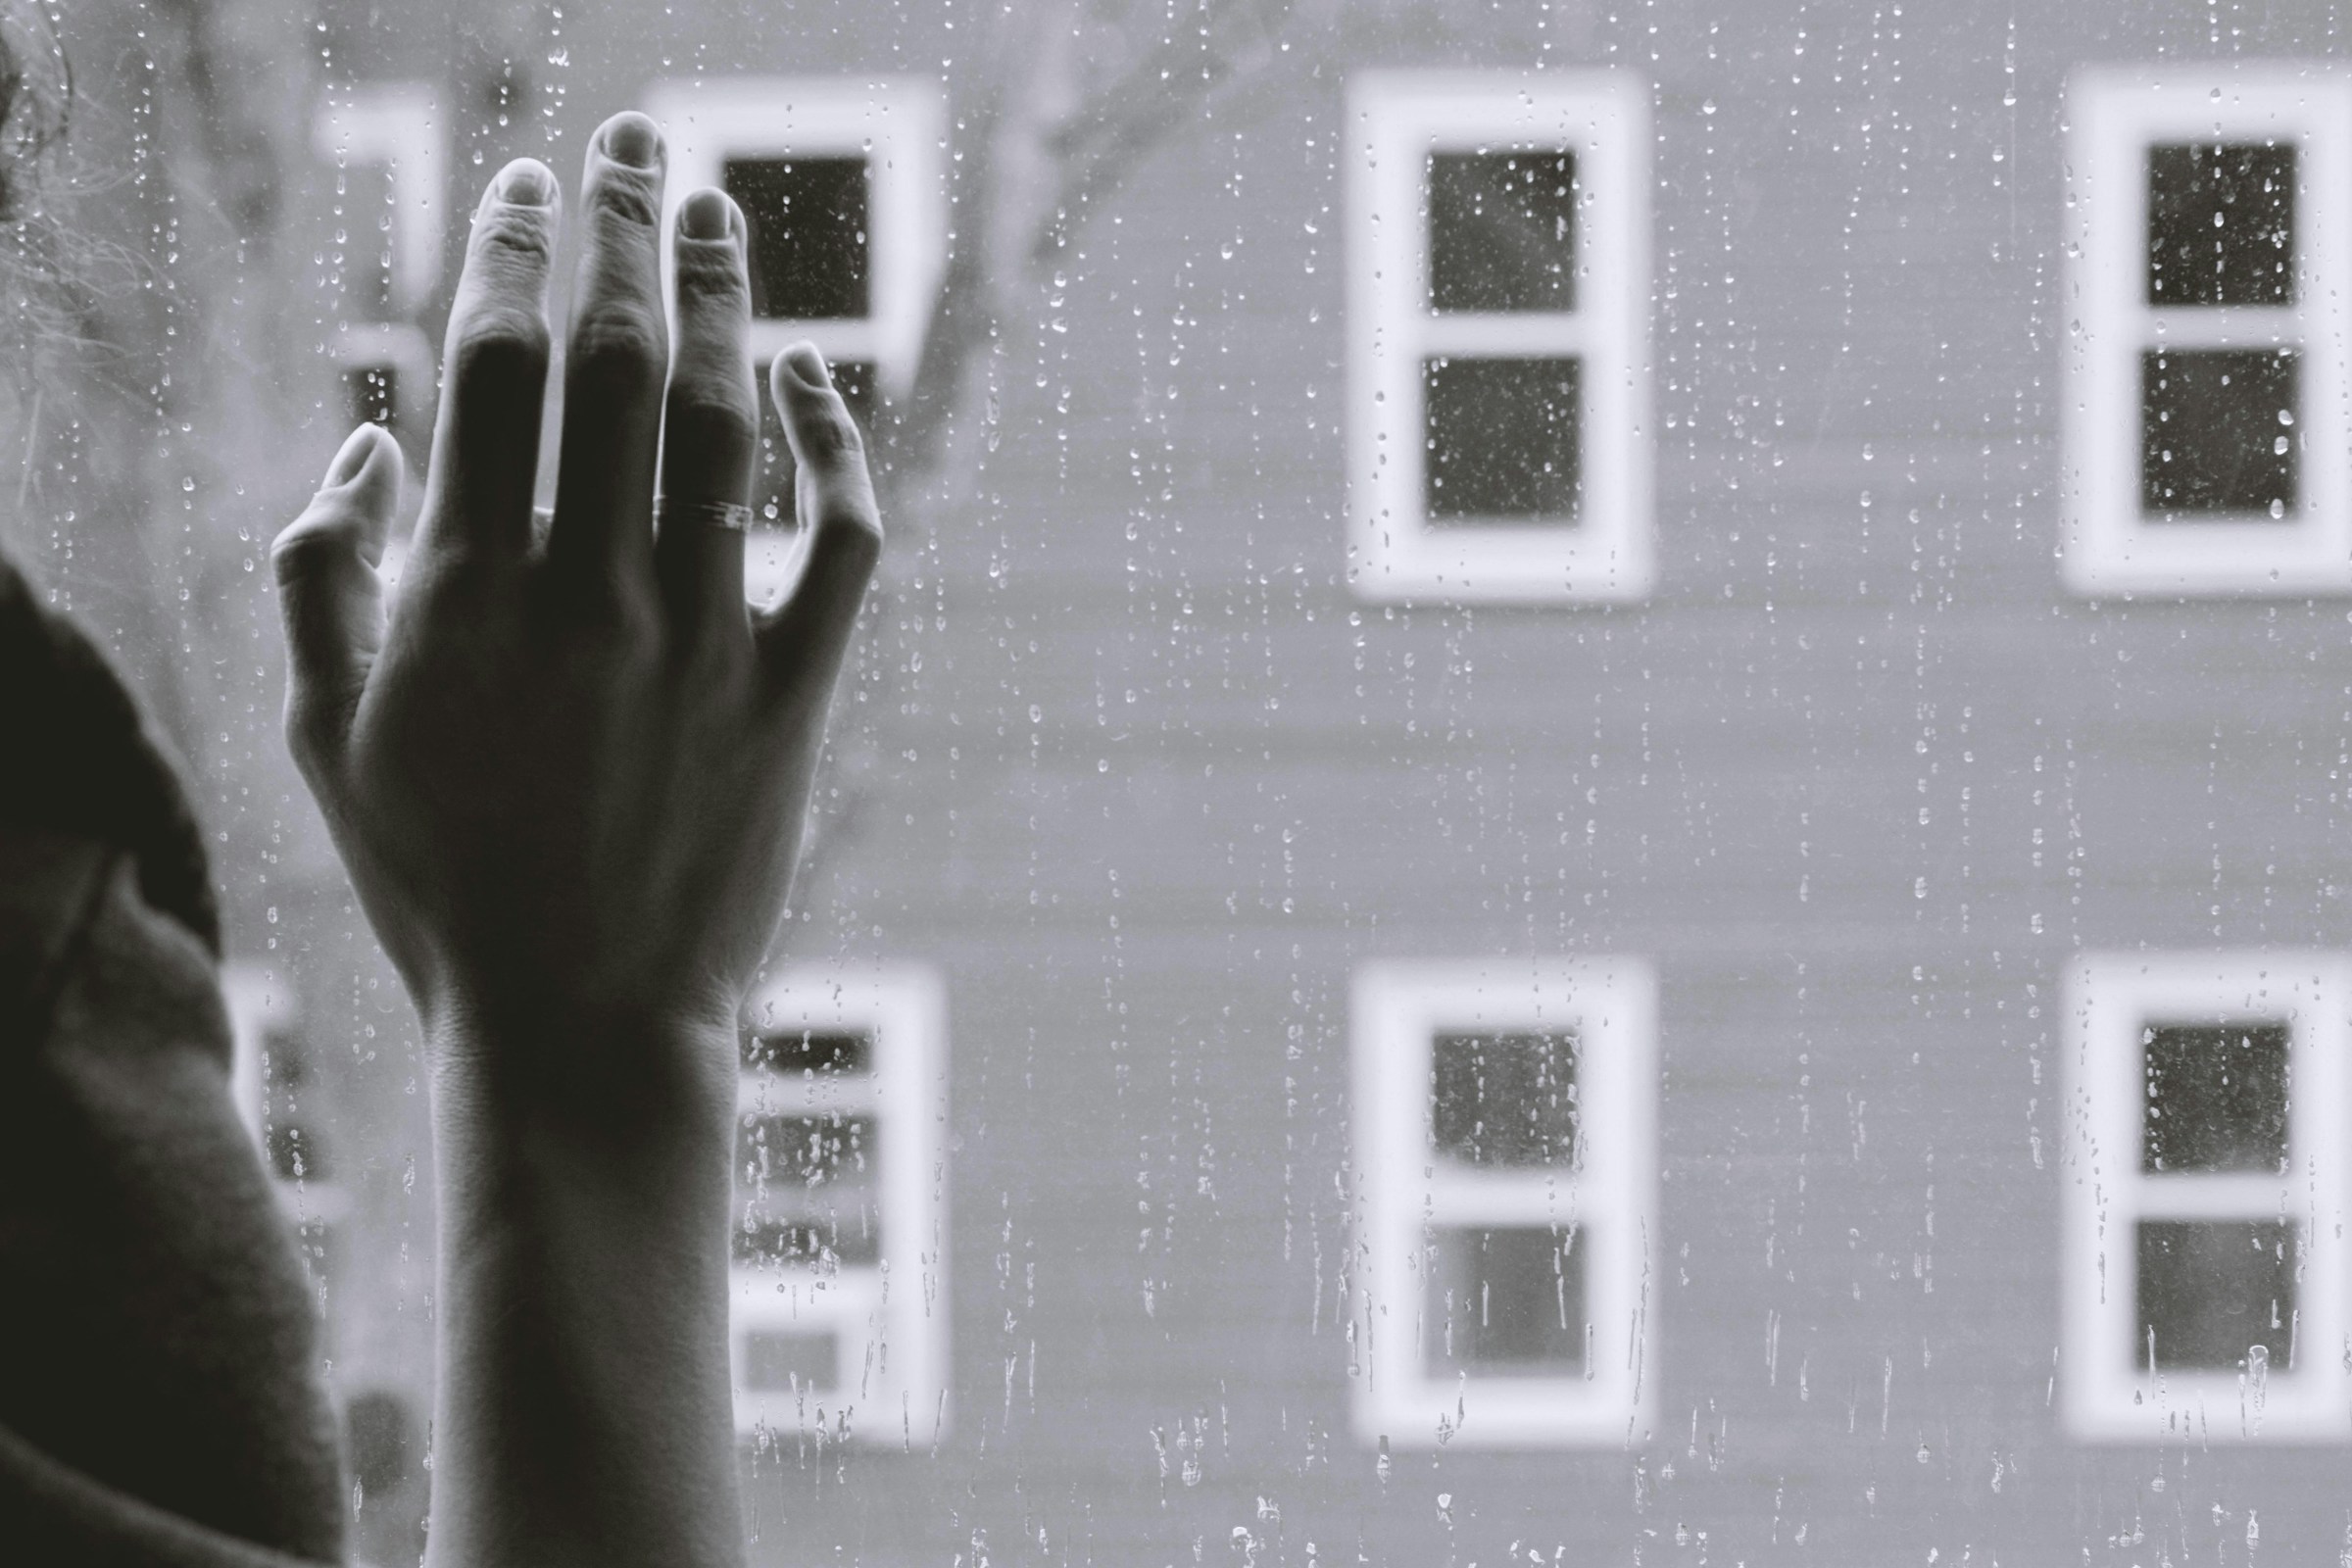 A grayscale photo of a woman's right hand on glass | Source: Pexels